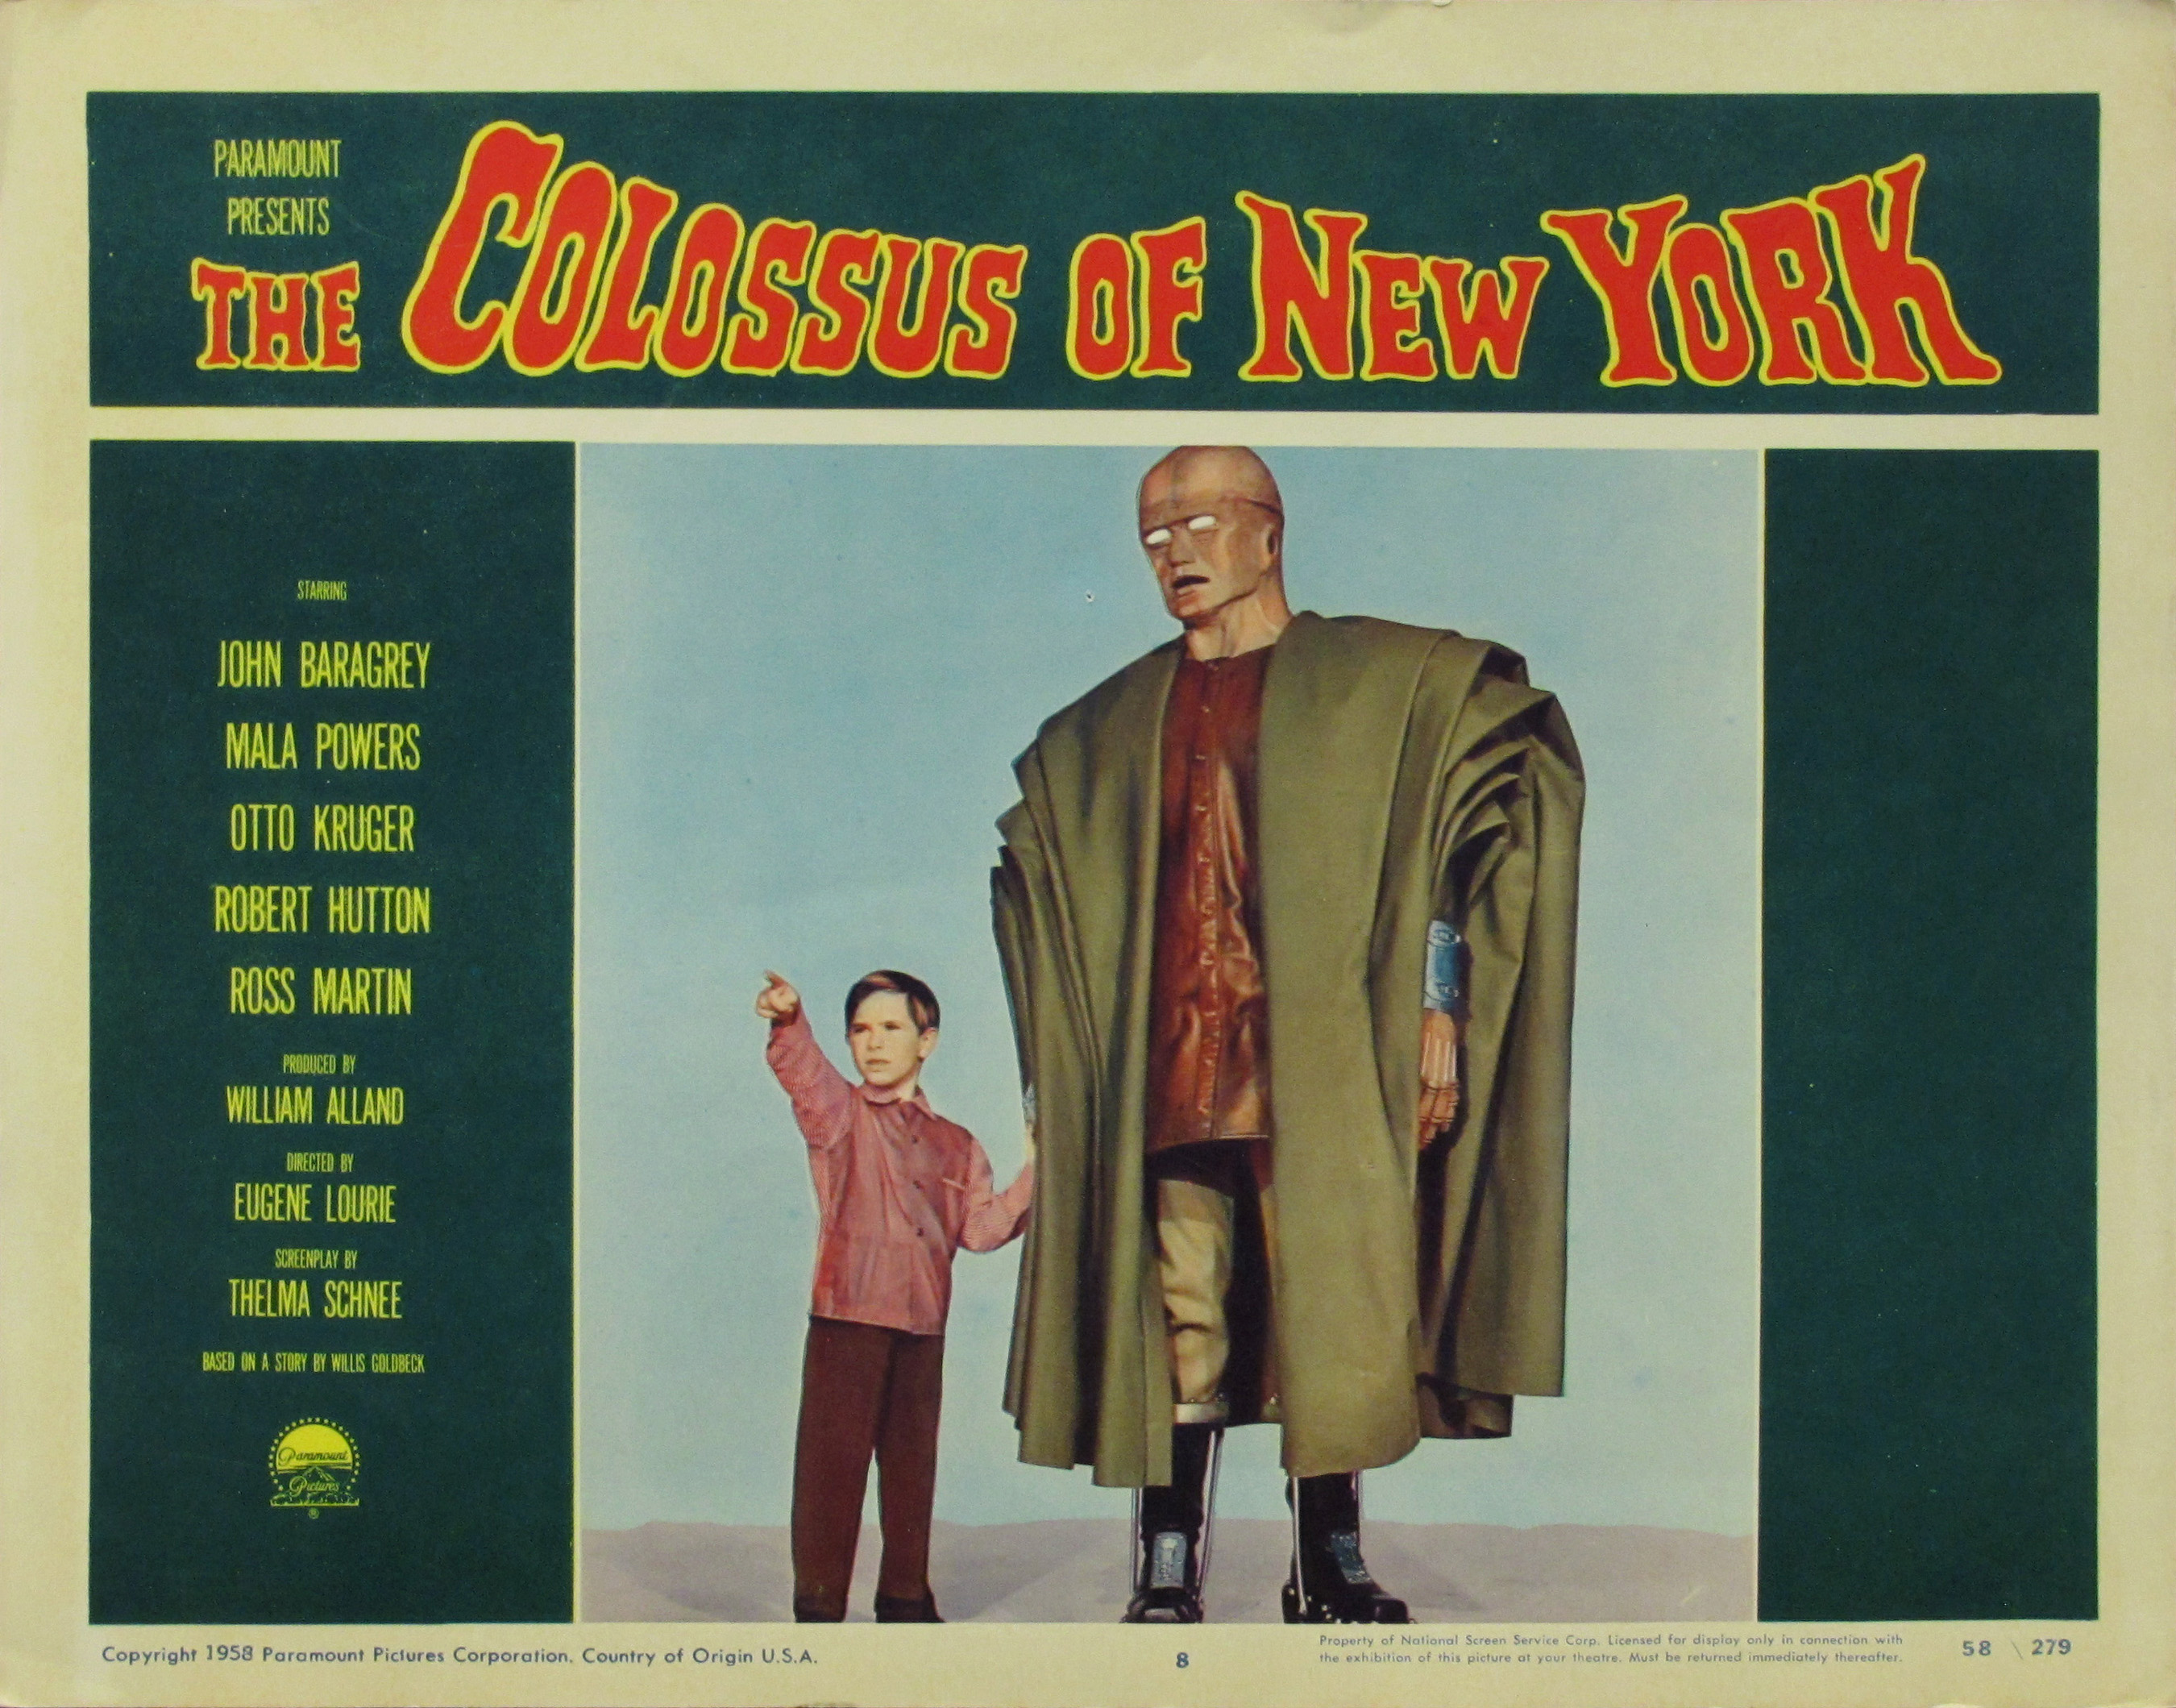 The Colossus Of New York